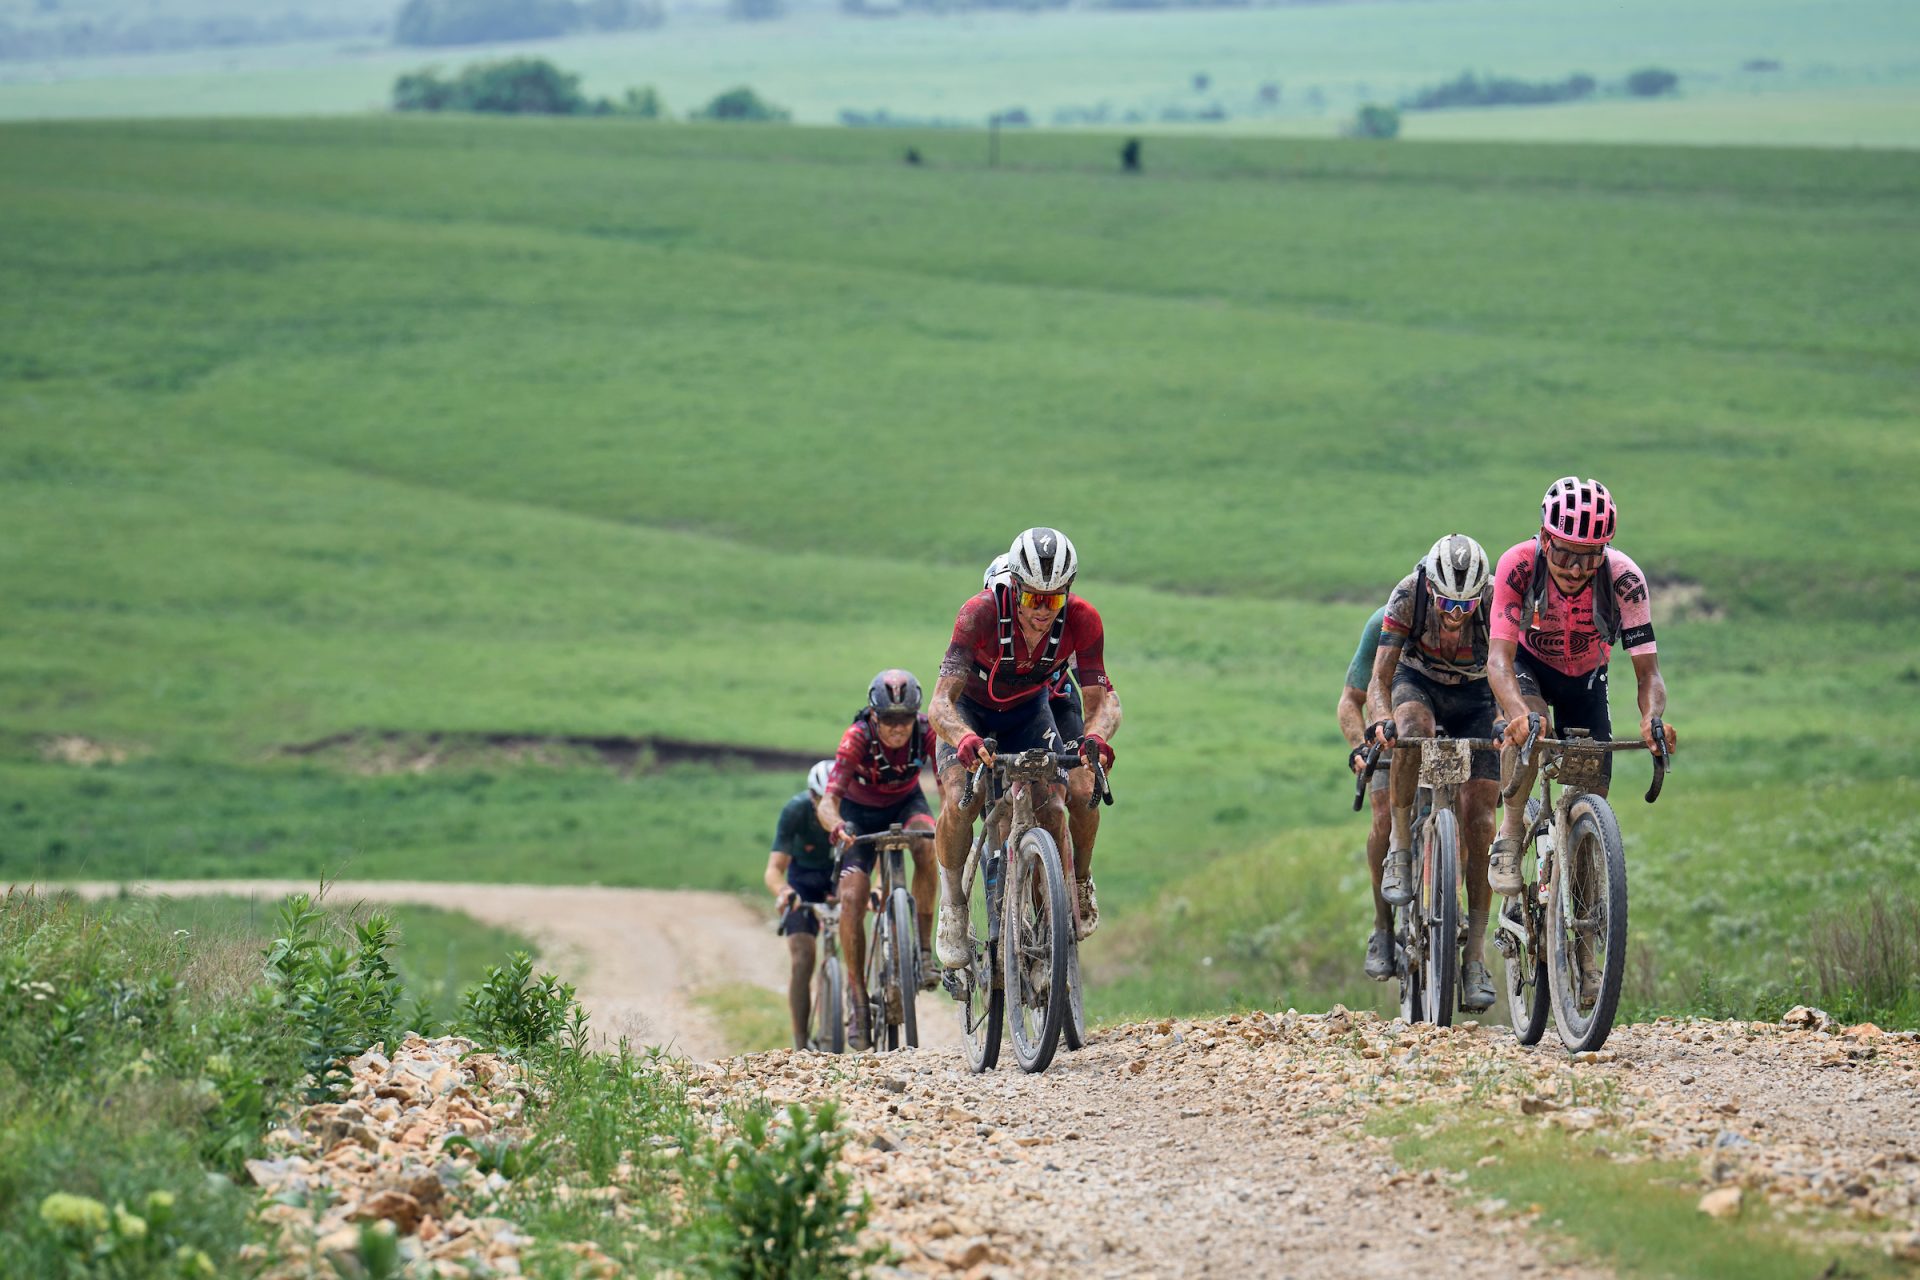 Racers at Unbound crest one of the Flint Hills' rolling rises. They're in two lines on a rocky double-track road. The riders all wear backpacks and are covered in grit and dust from the ride.